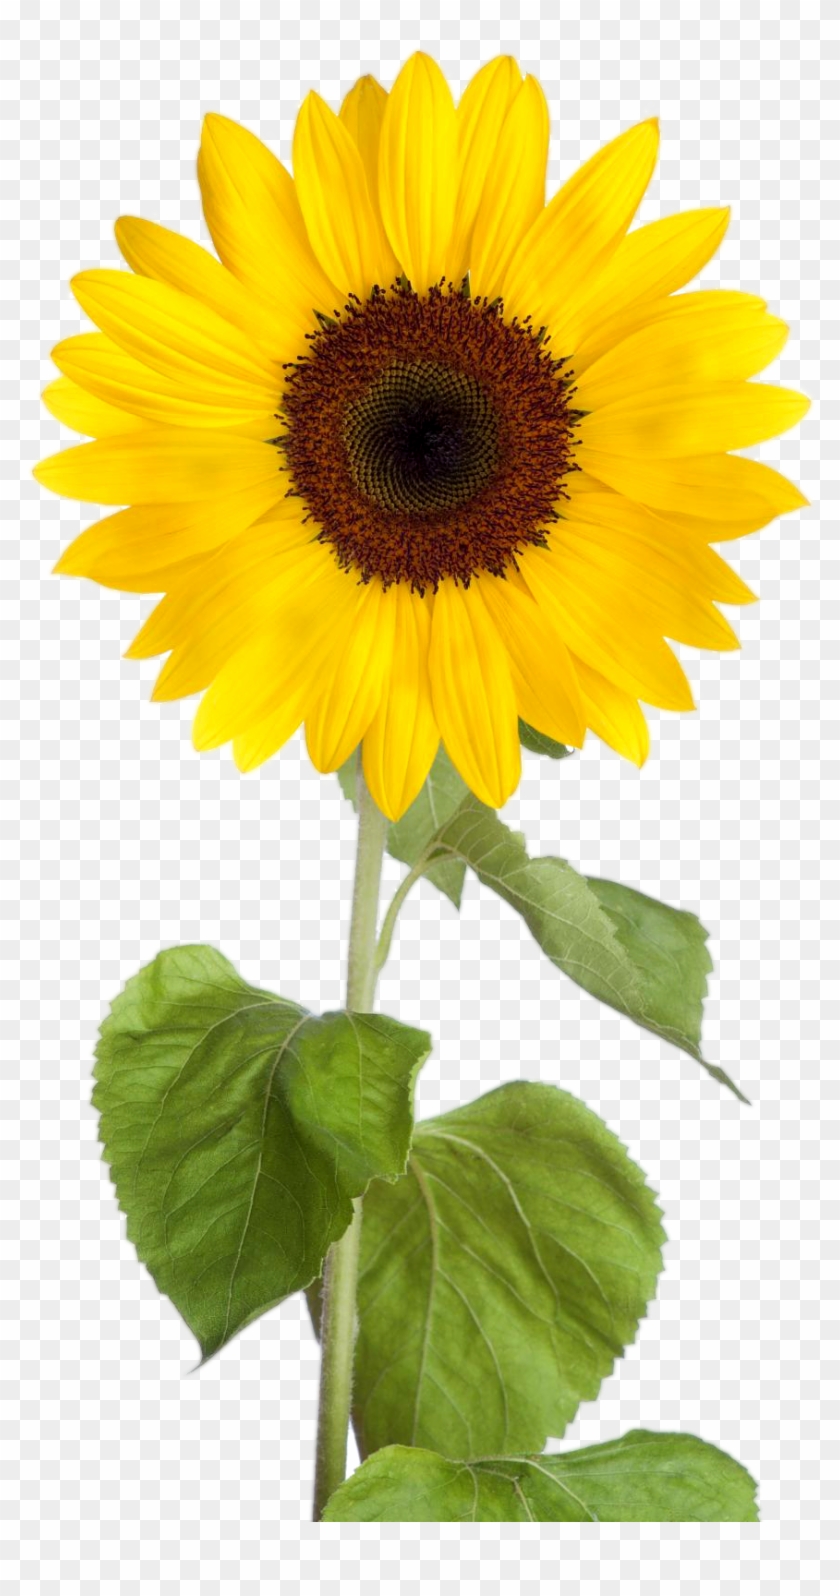 Png Image - Sunflower Png #272027